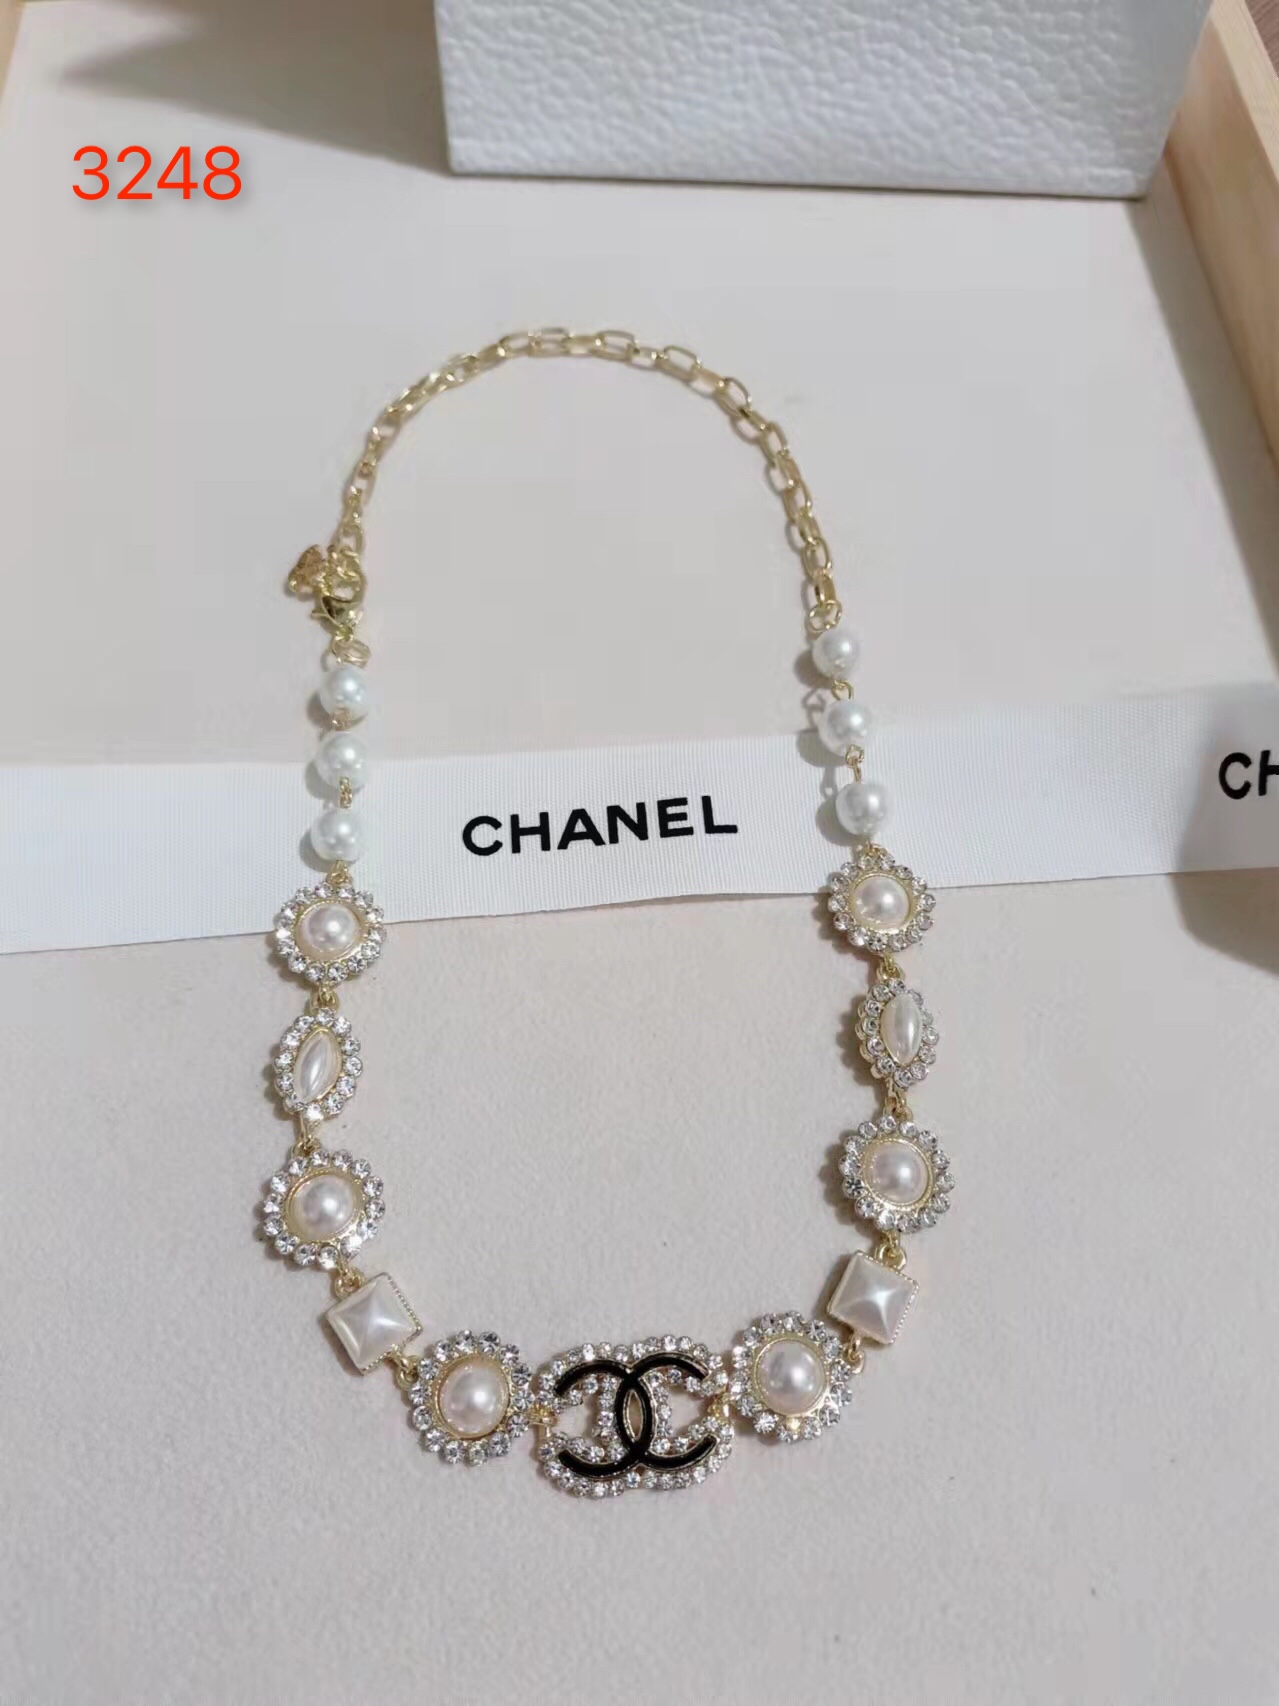 Chanel necklace 109160